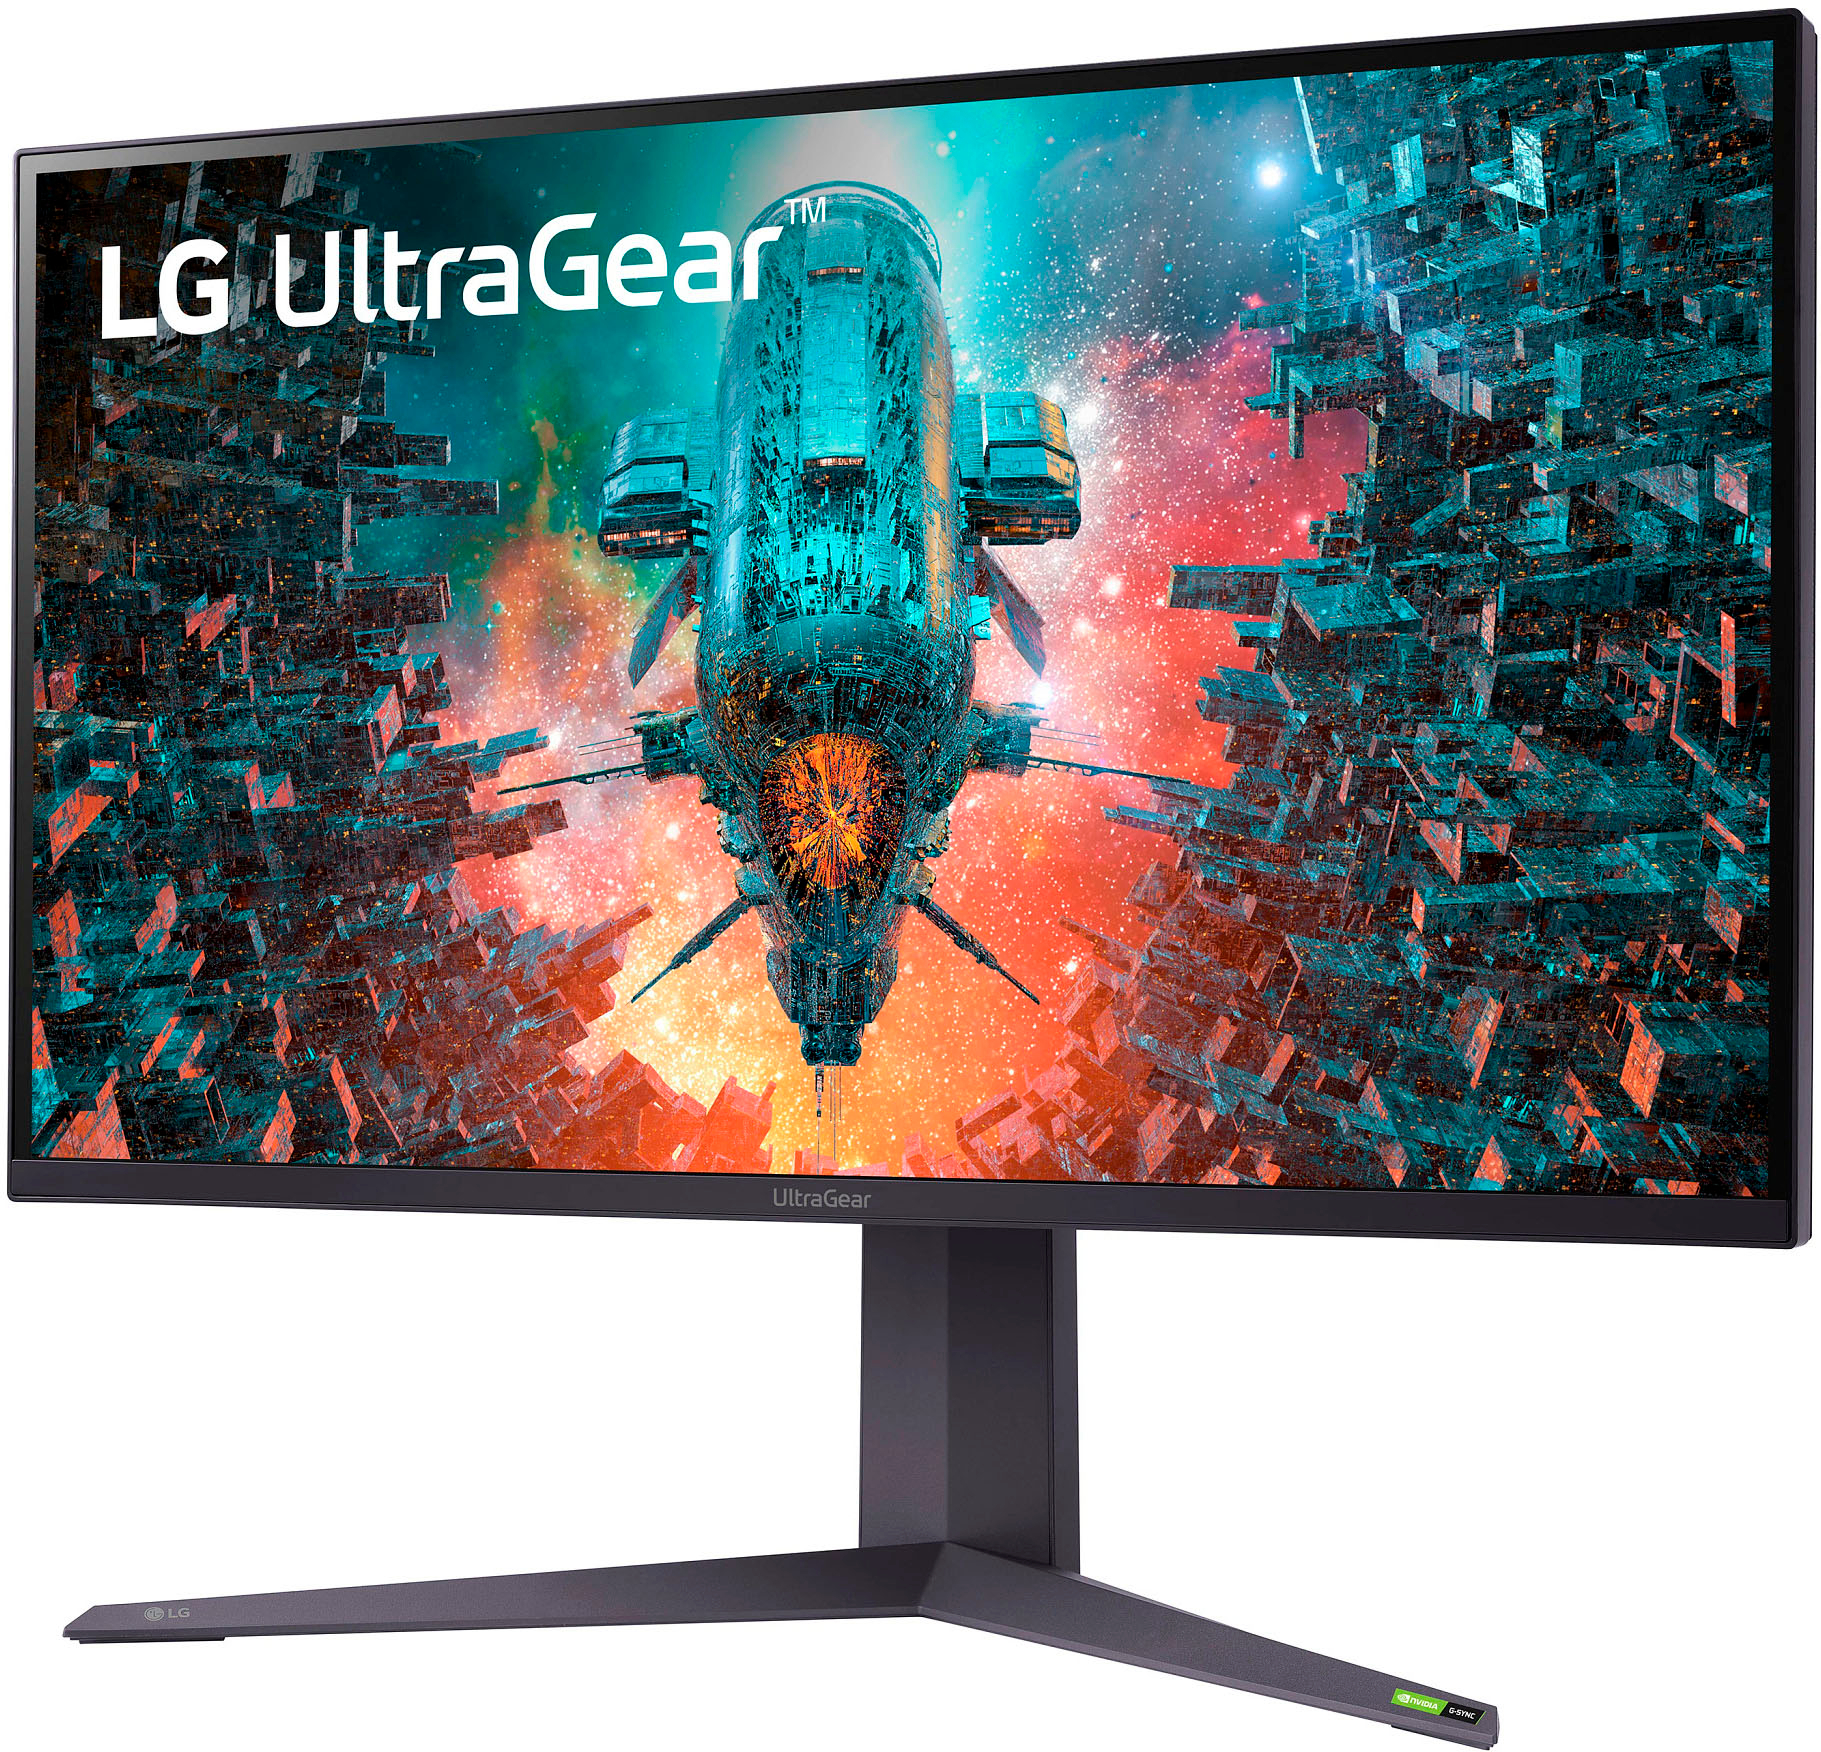 27” LG UltraGear™ UHD Gaming Monitor with 144Hz Refresh Rate